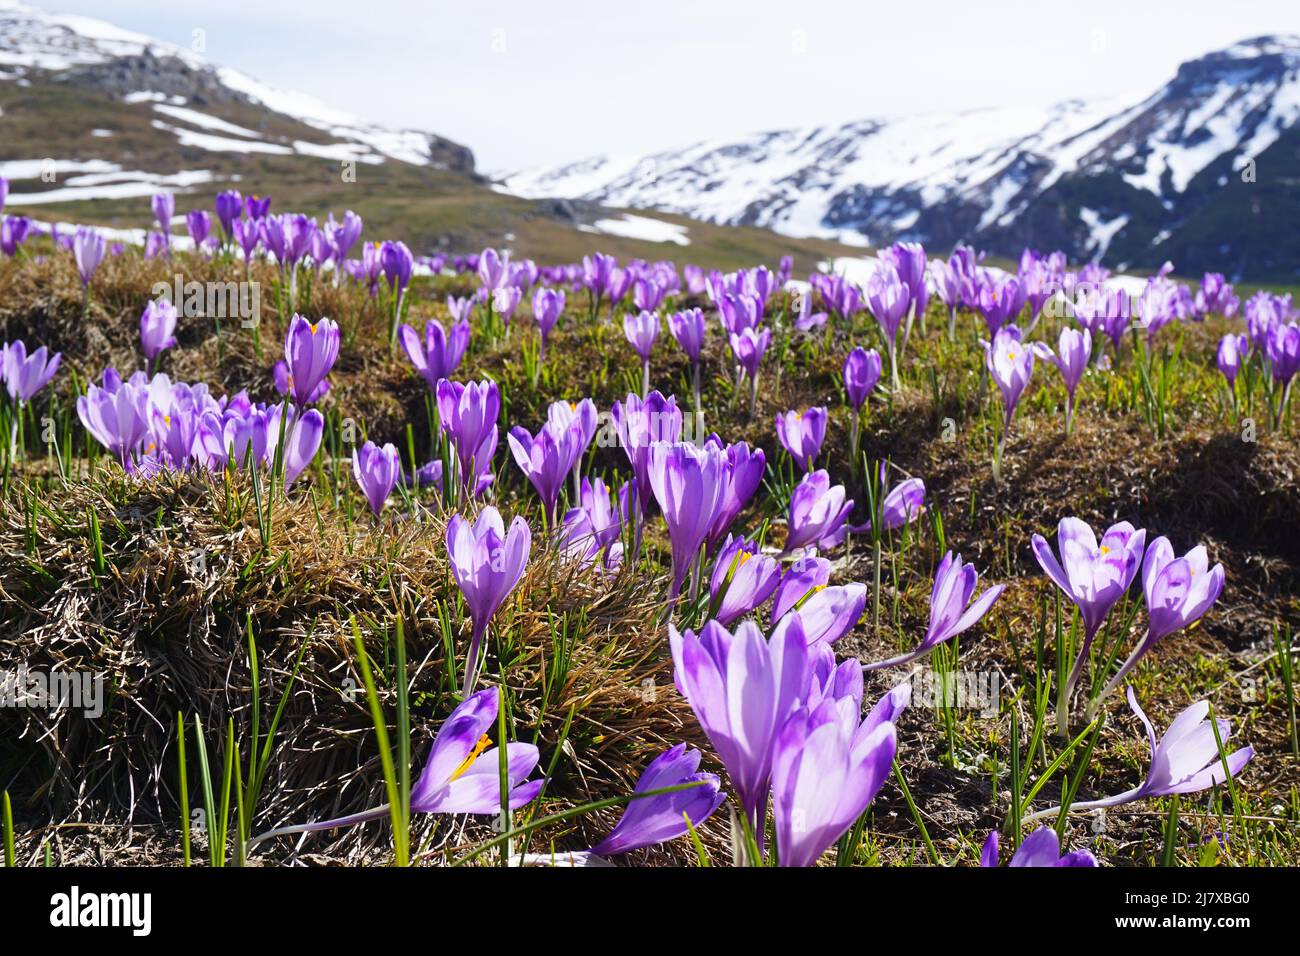 Blooming purple crocus field in spring in the Carpathian Mountains, Romania Stock Photo